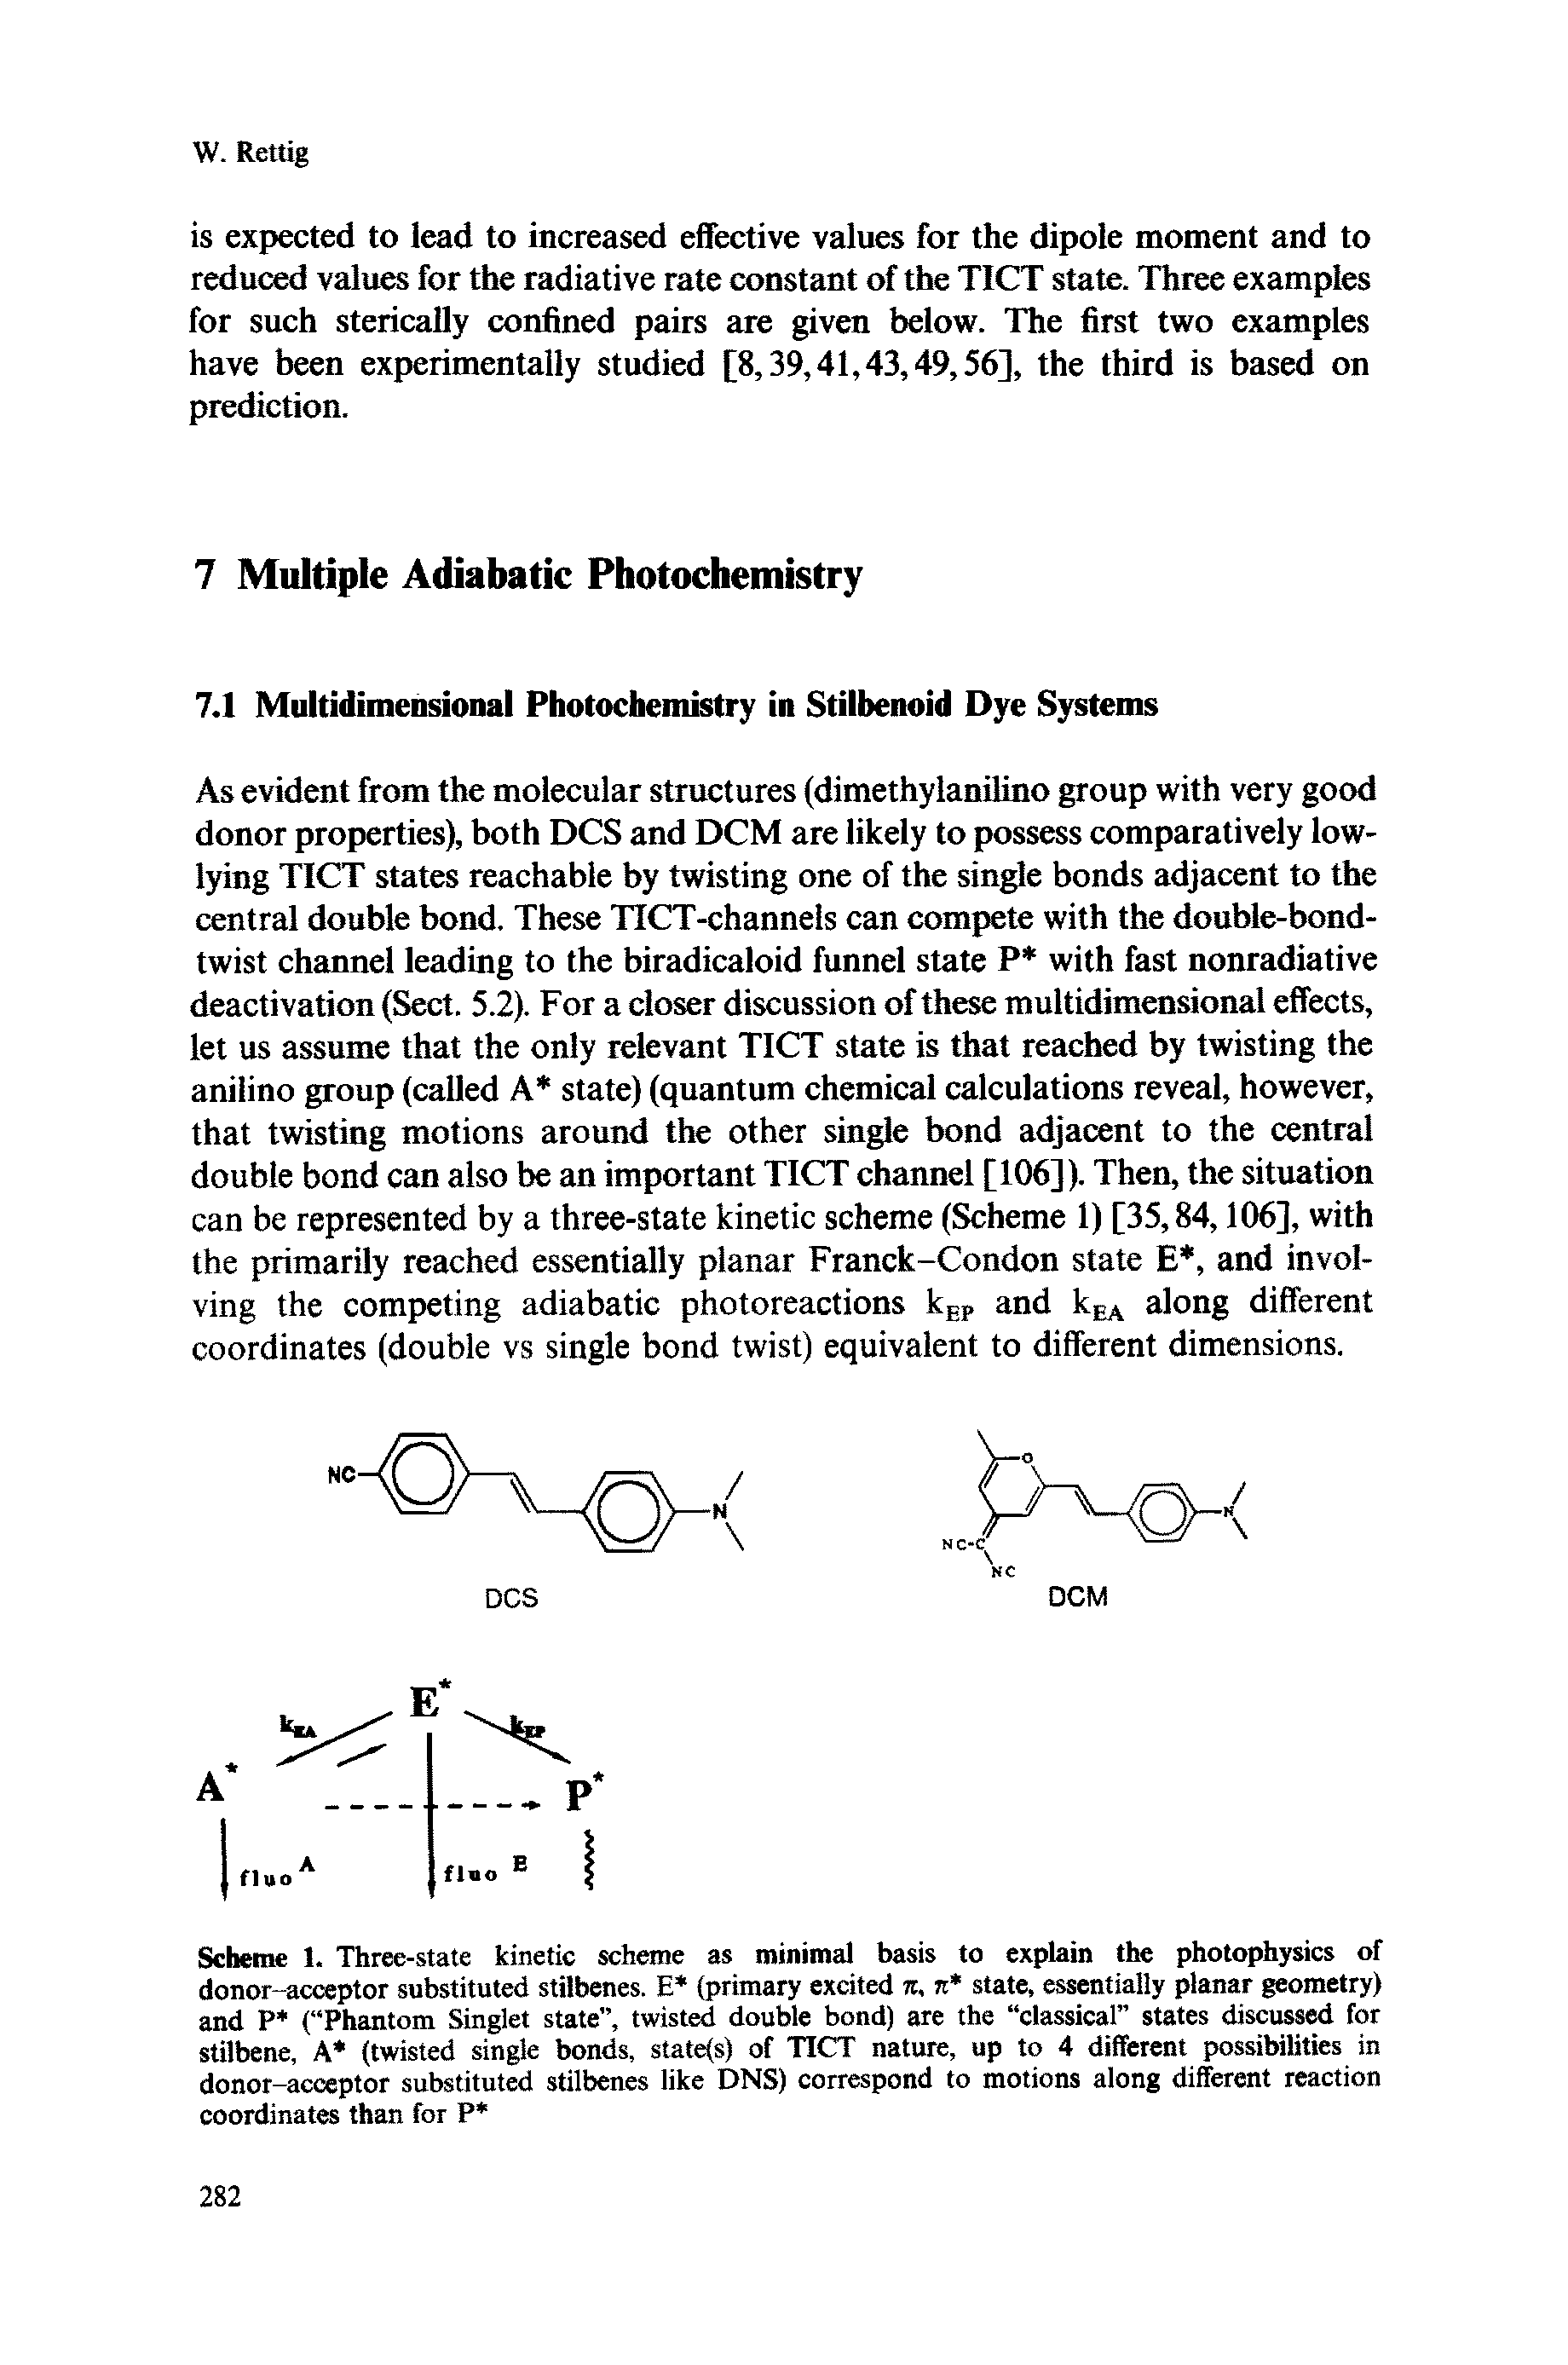 Scheme 1. Three-state kinetic scheme as minimal basis to explain the photophysics of donor-acceptor substituted stilbenes. E (primary excited n, n state, essentially planar geometry) and P ( Phantom Singlet state , twisted double bond) are the classical states discussed for stilbene, A (twisted single bonds, state(s) of TICT nature, up to 4 different possibilities in donor-acceptor substituted stilbenes like DNS) correspond to motions along different reaction coordinates than for P ...